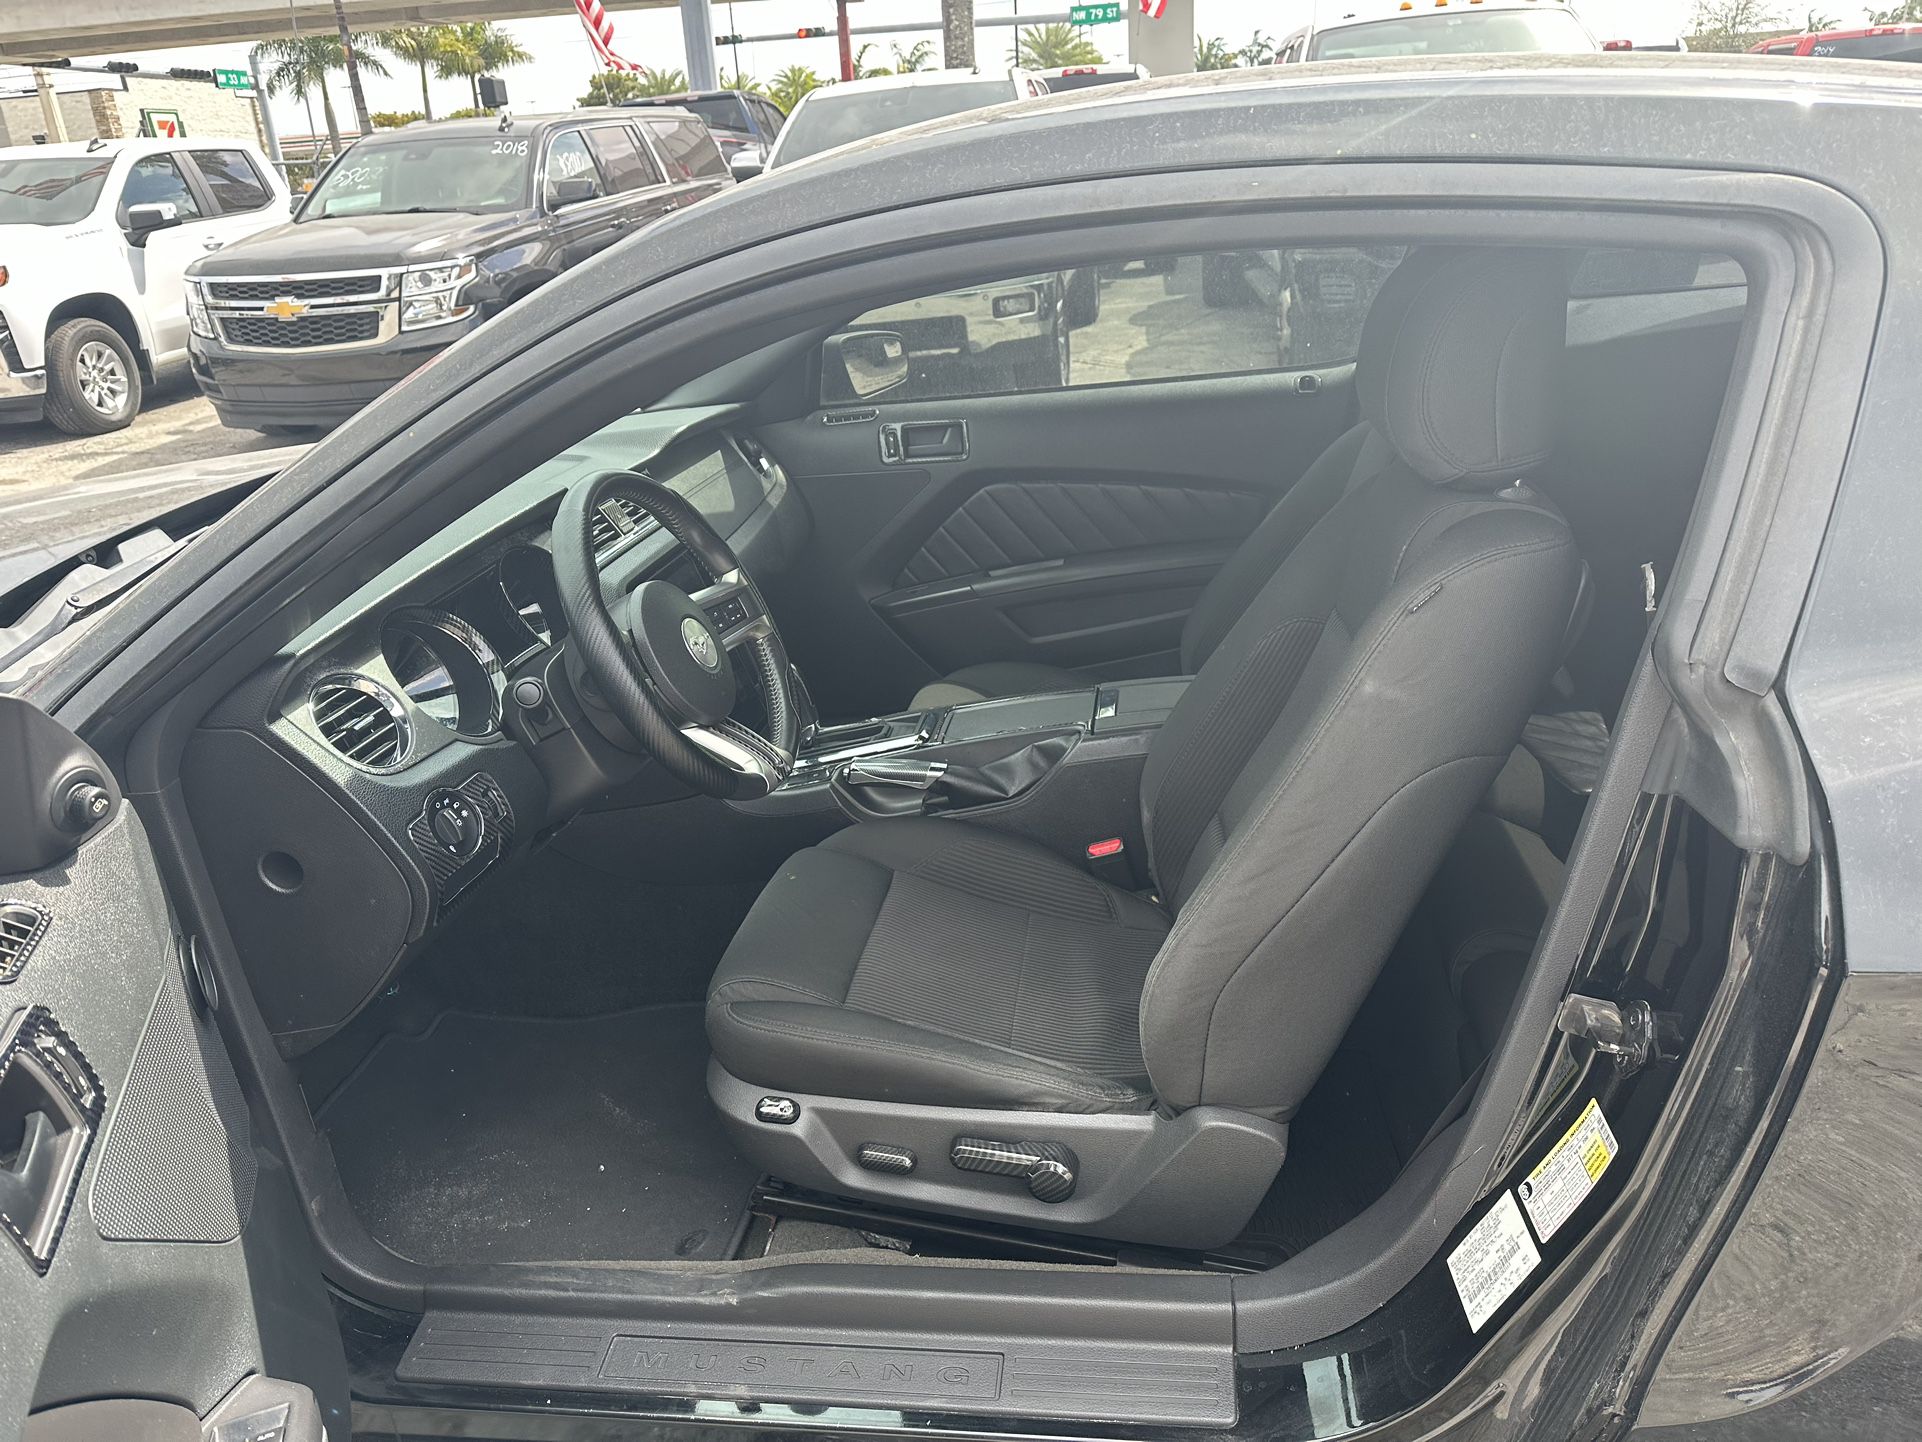 used 2014 ford mustang - interior view 1